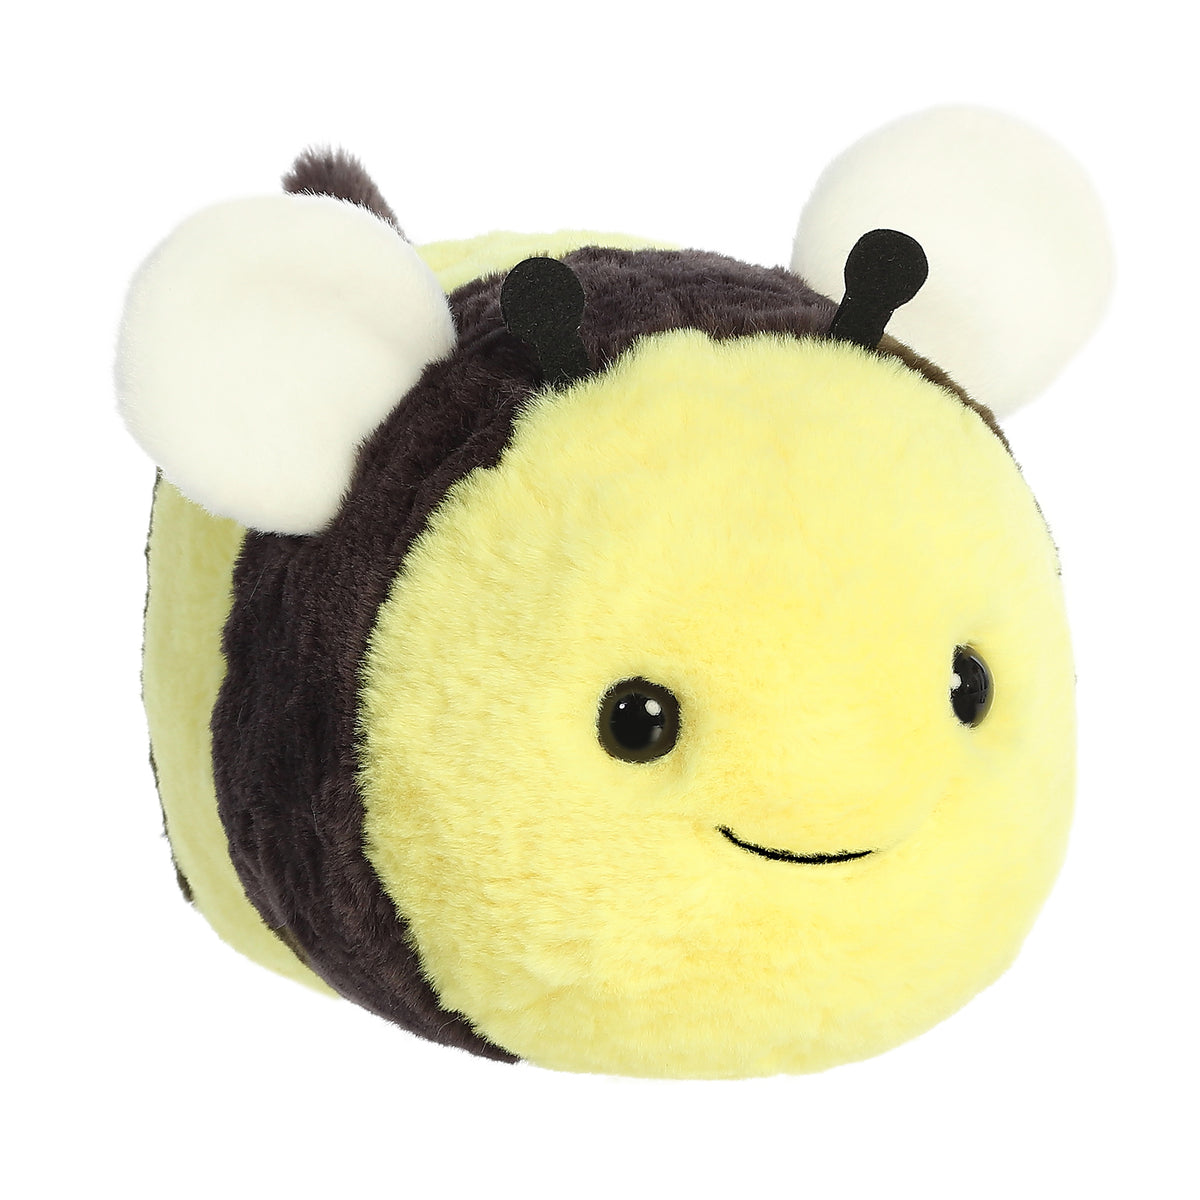 Spudsters™ Bee plush by Aurora, potato-shaped with vibrant yellow and black body, soft wings, sparkling eyes, and a smile!